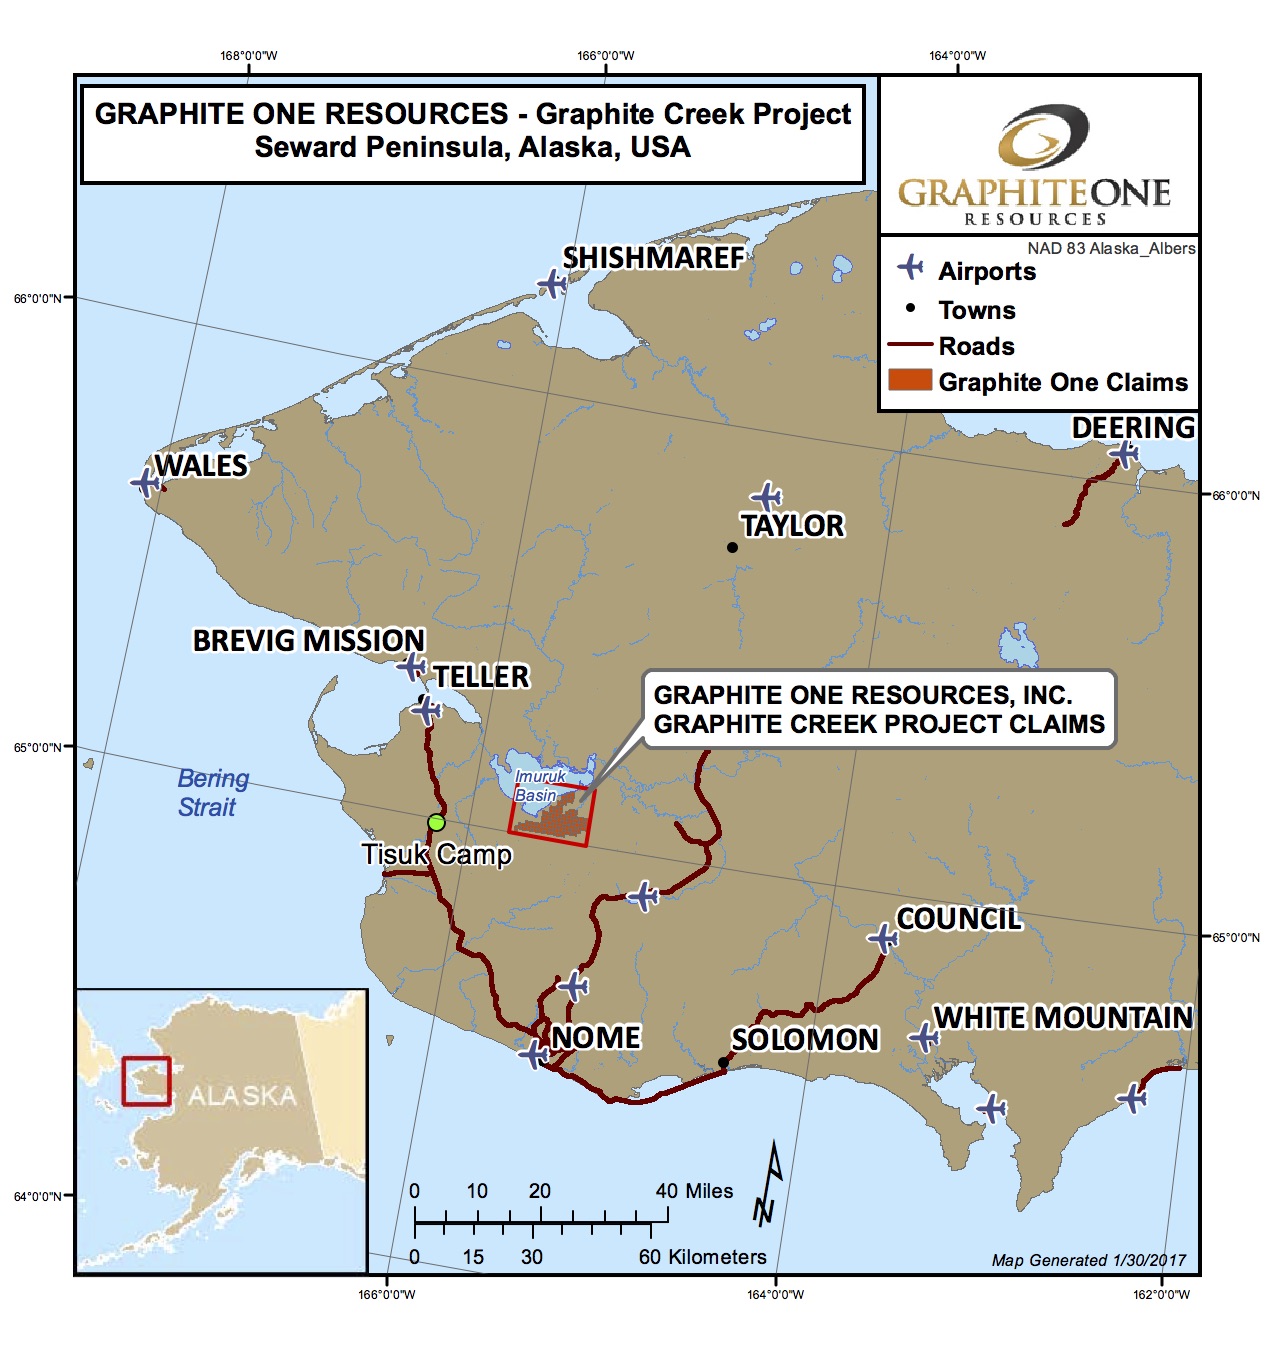 The proposed Graphite Creek mine site that has a net present value of over $1-billion according to the latest assessment. Photo Credit: Graphite One Resources (2017)